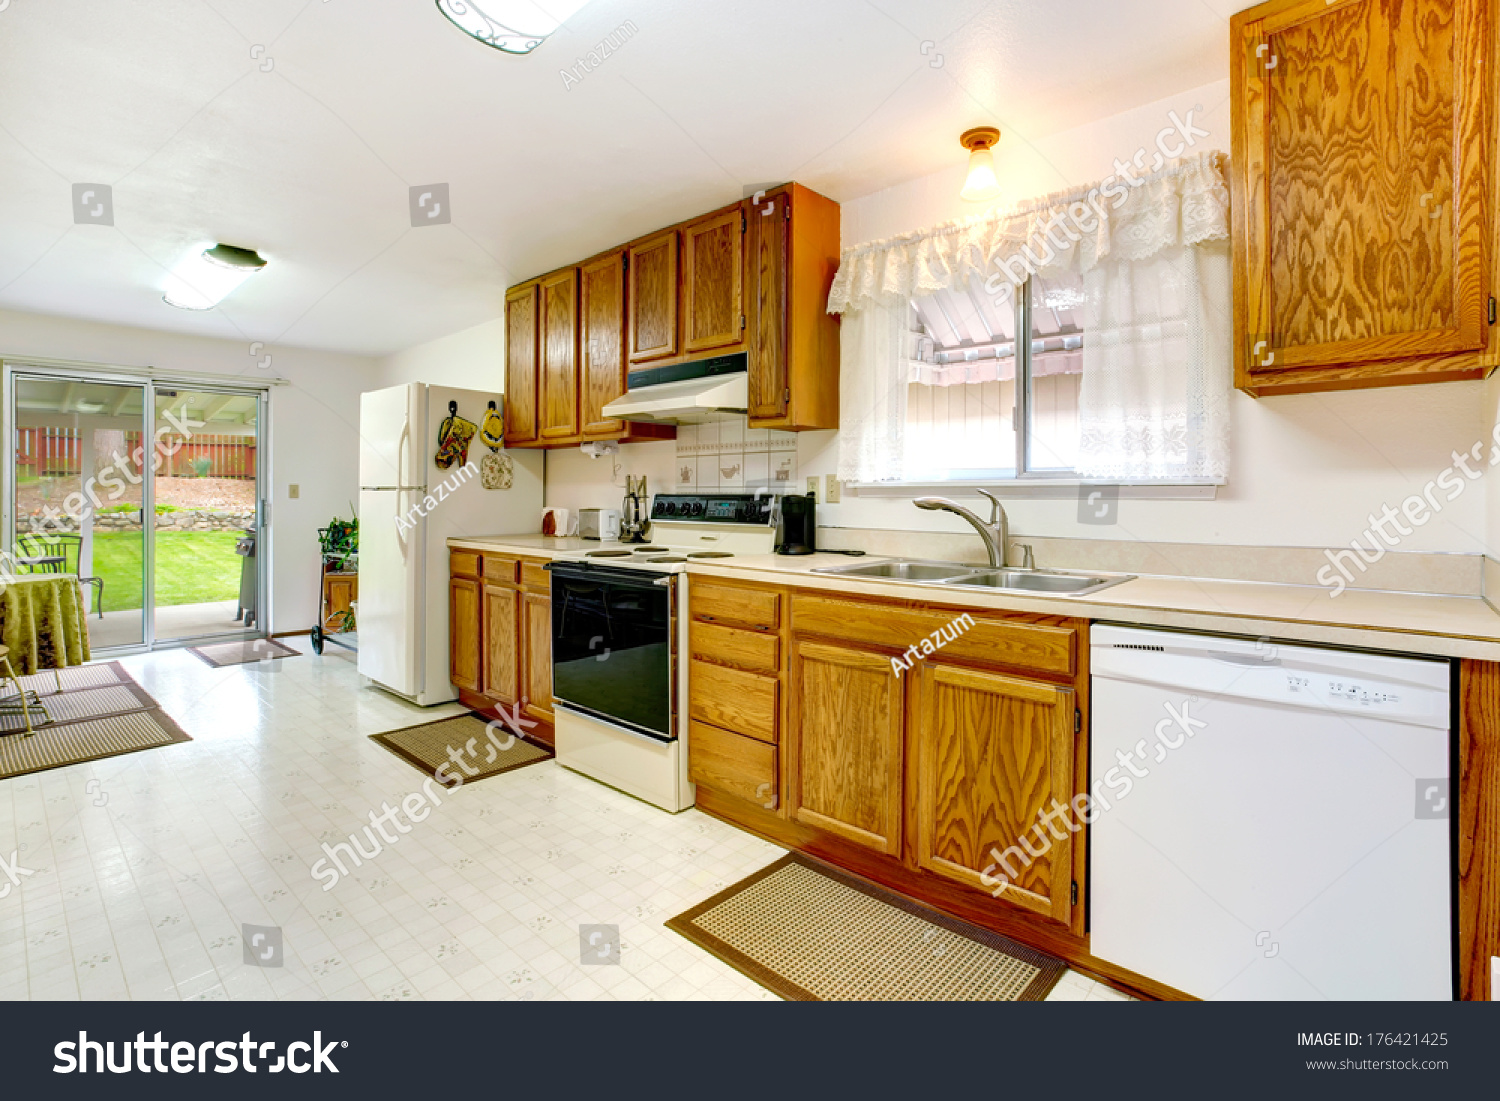 Bright Kitchen Wood Cabinets Tile Floor Stock Photo Edit Now